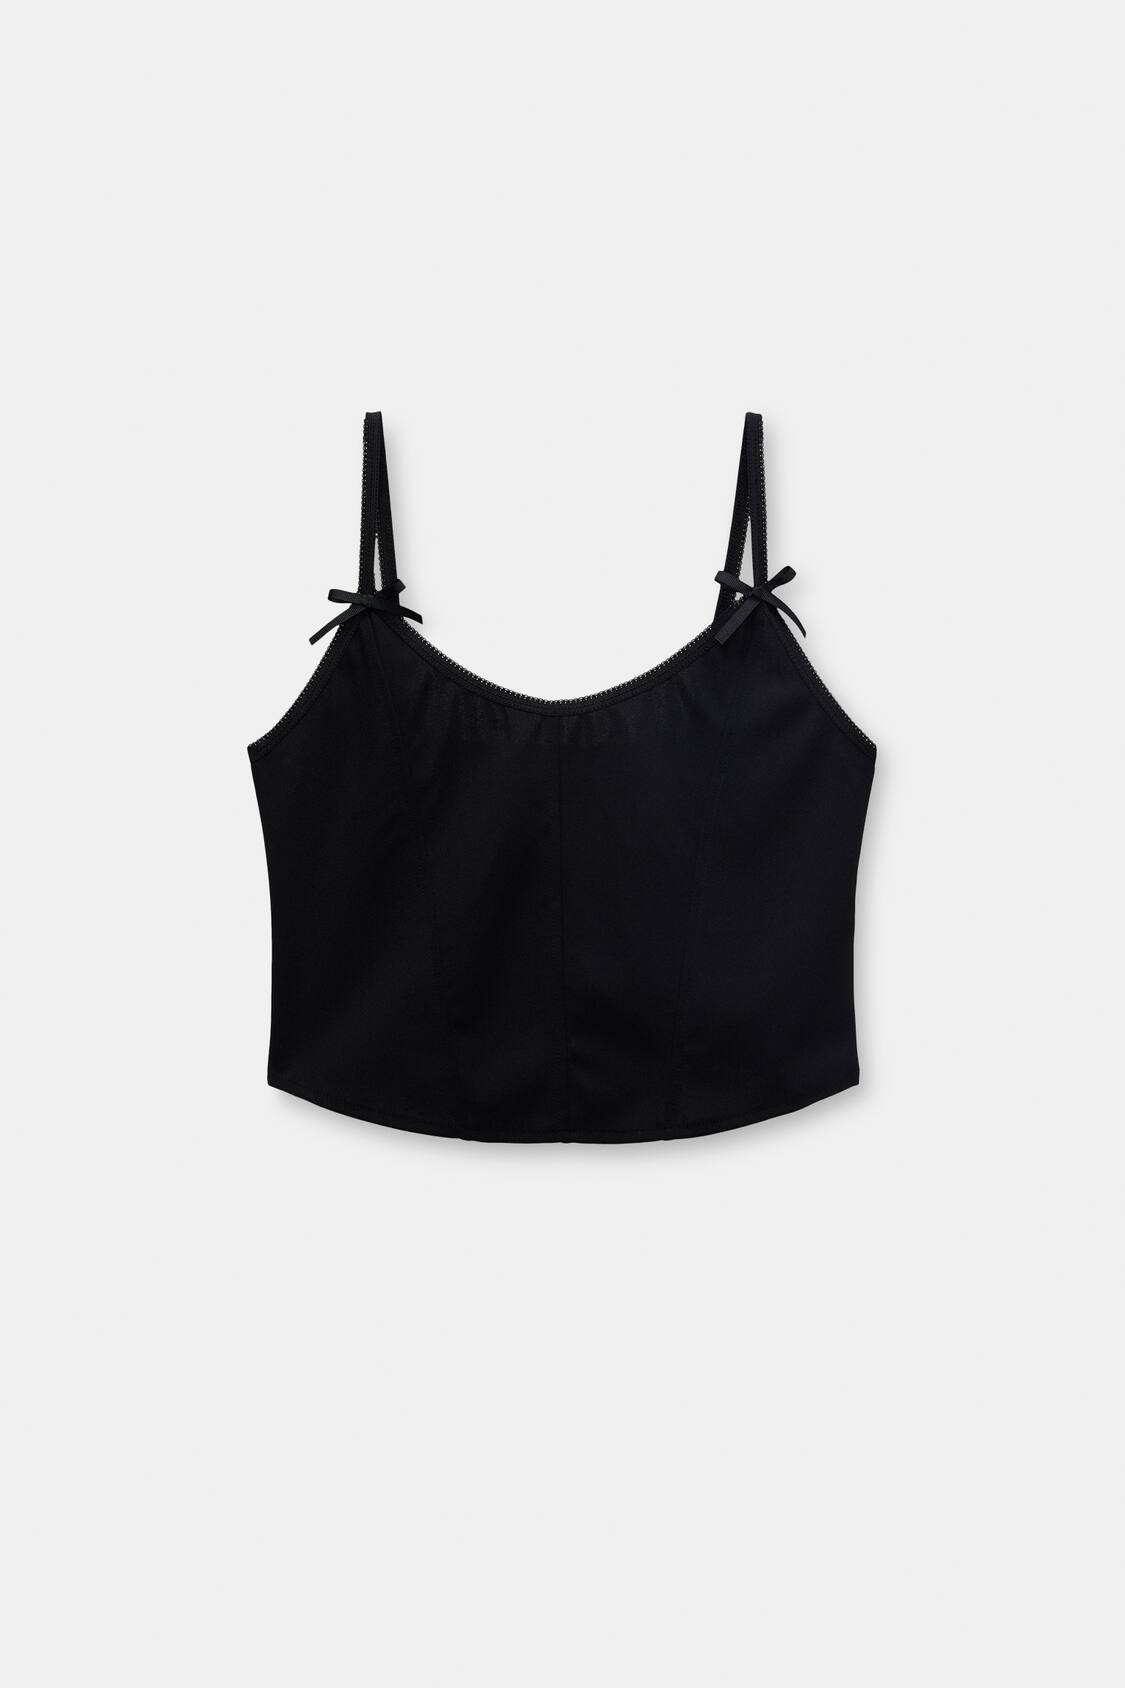 H&M Sheer Corset-style Top